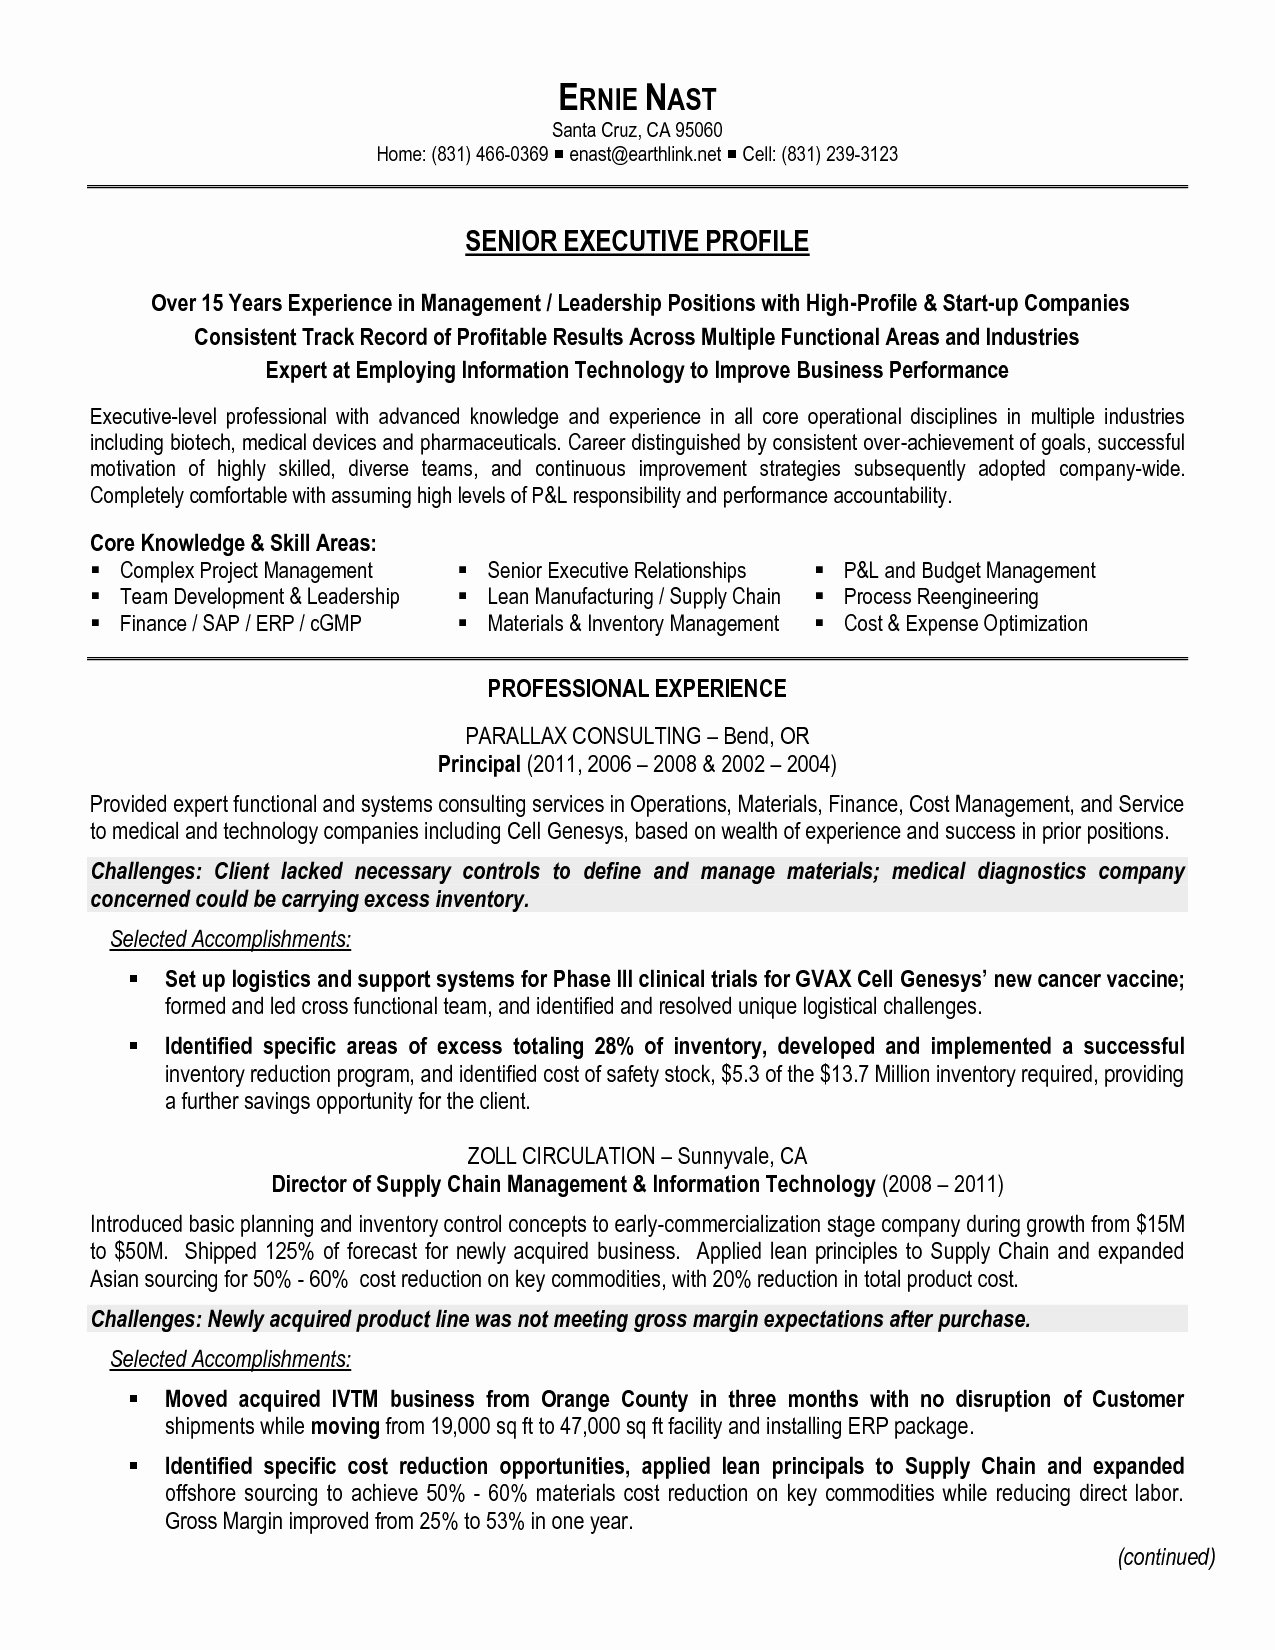 Supply Chain Management Resume Objective Resume Ideas